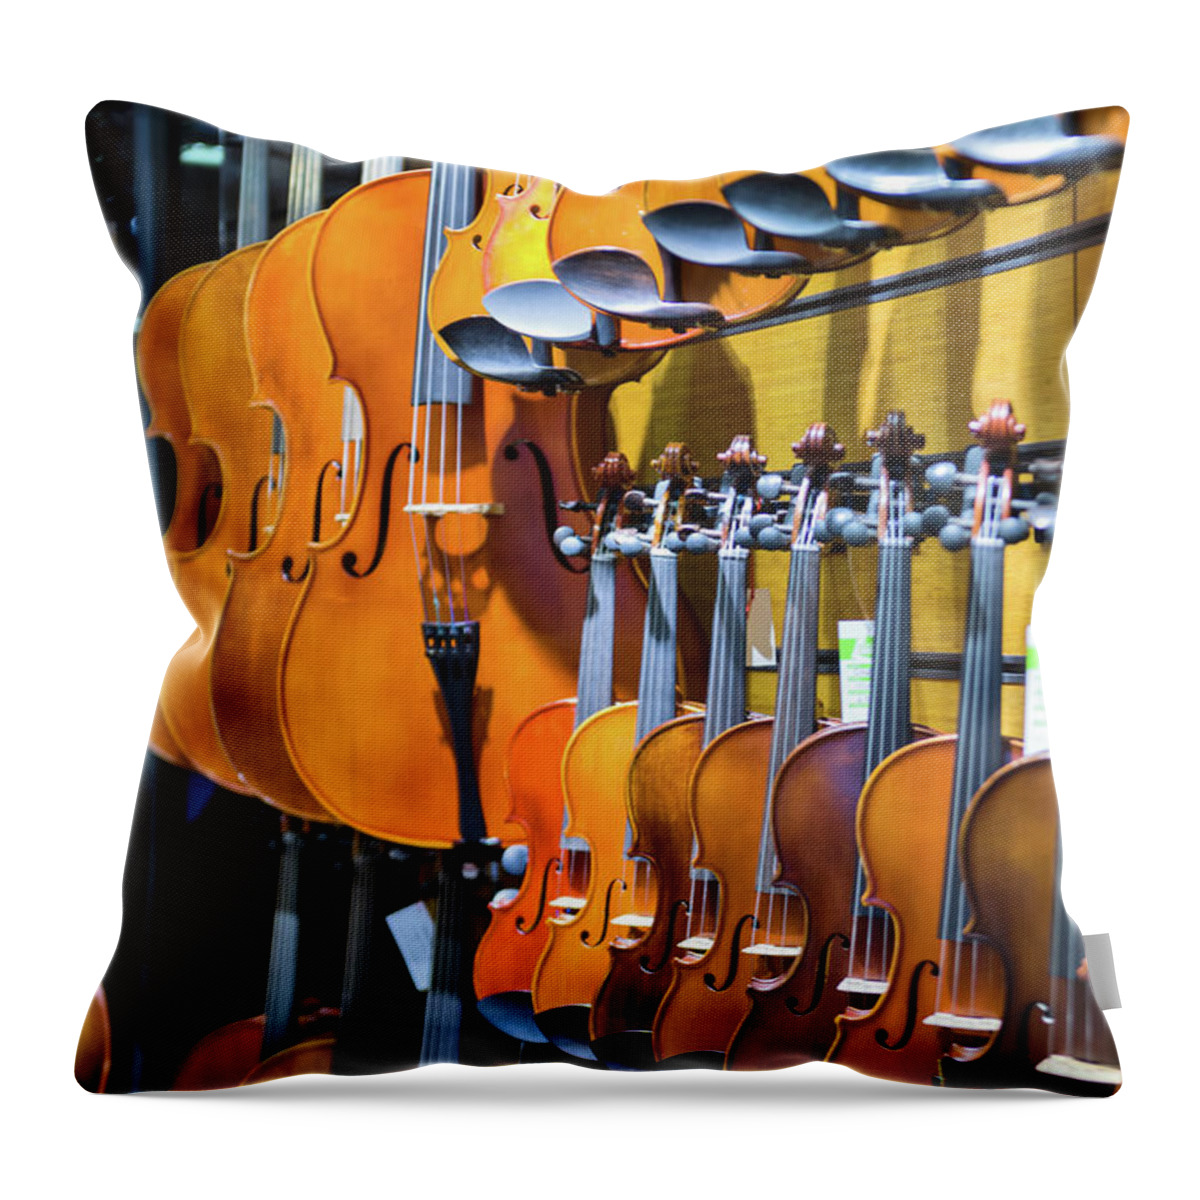 Istanbul Throw Pillow featuring the photograph Violin Shop by Salvator Barki